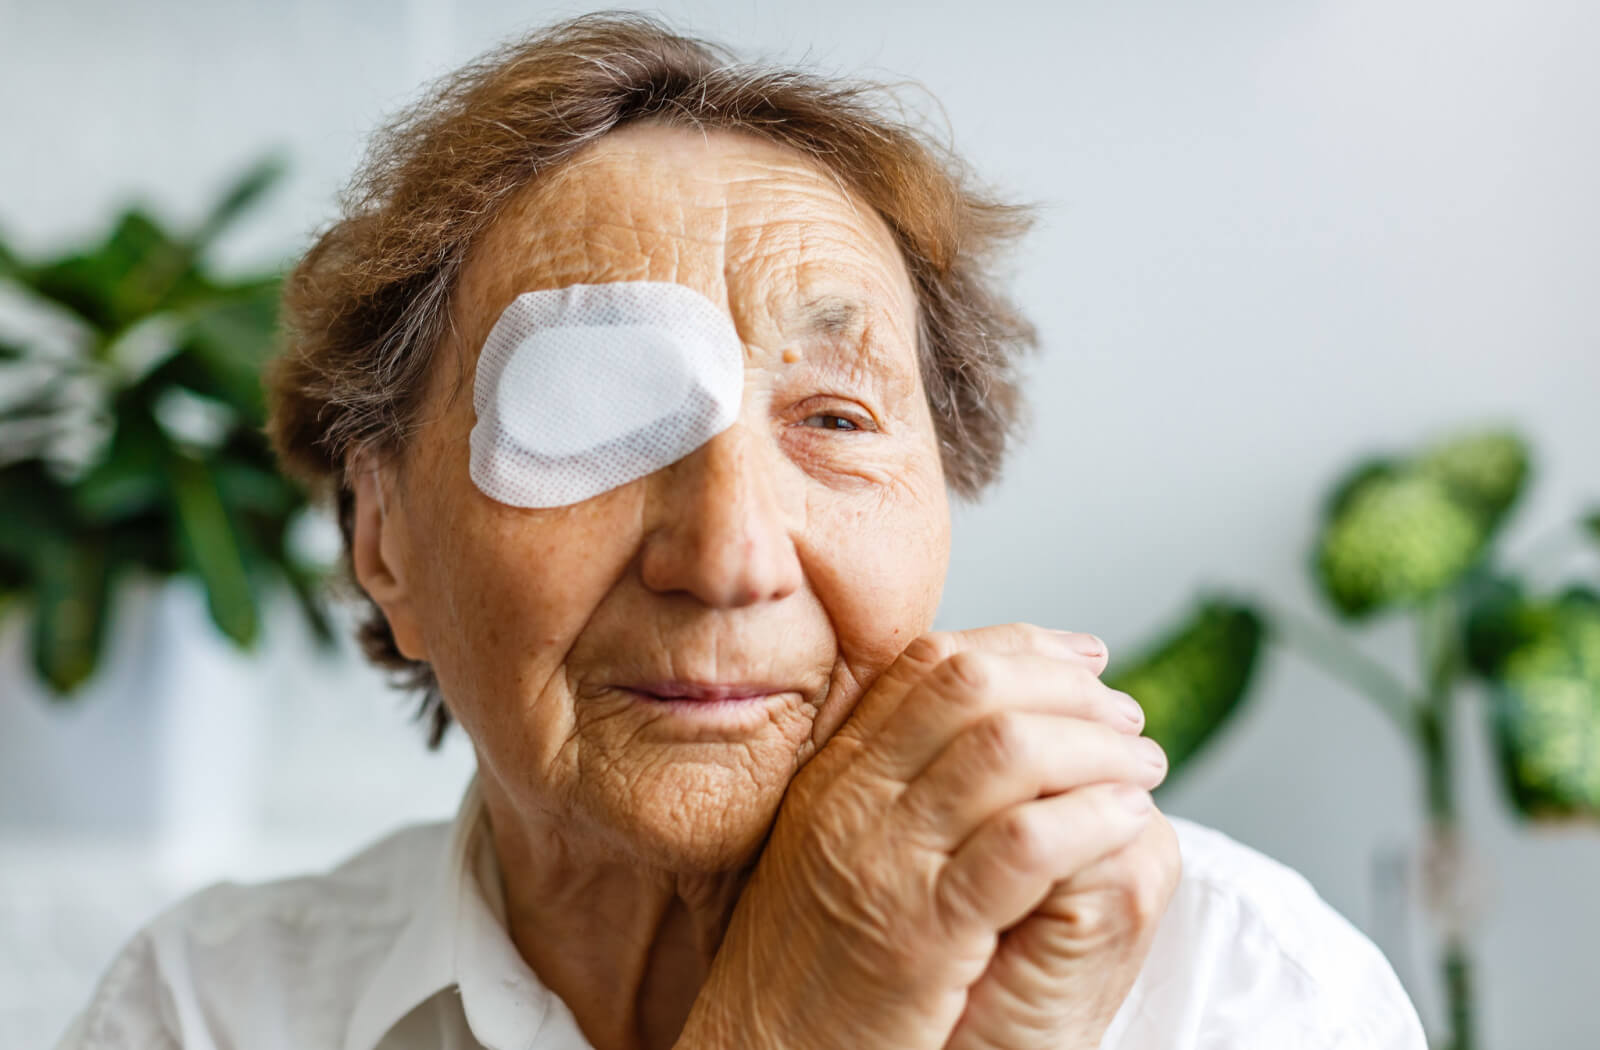 An elderly woman is using an eye shield covering after cataract surgery.